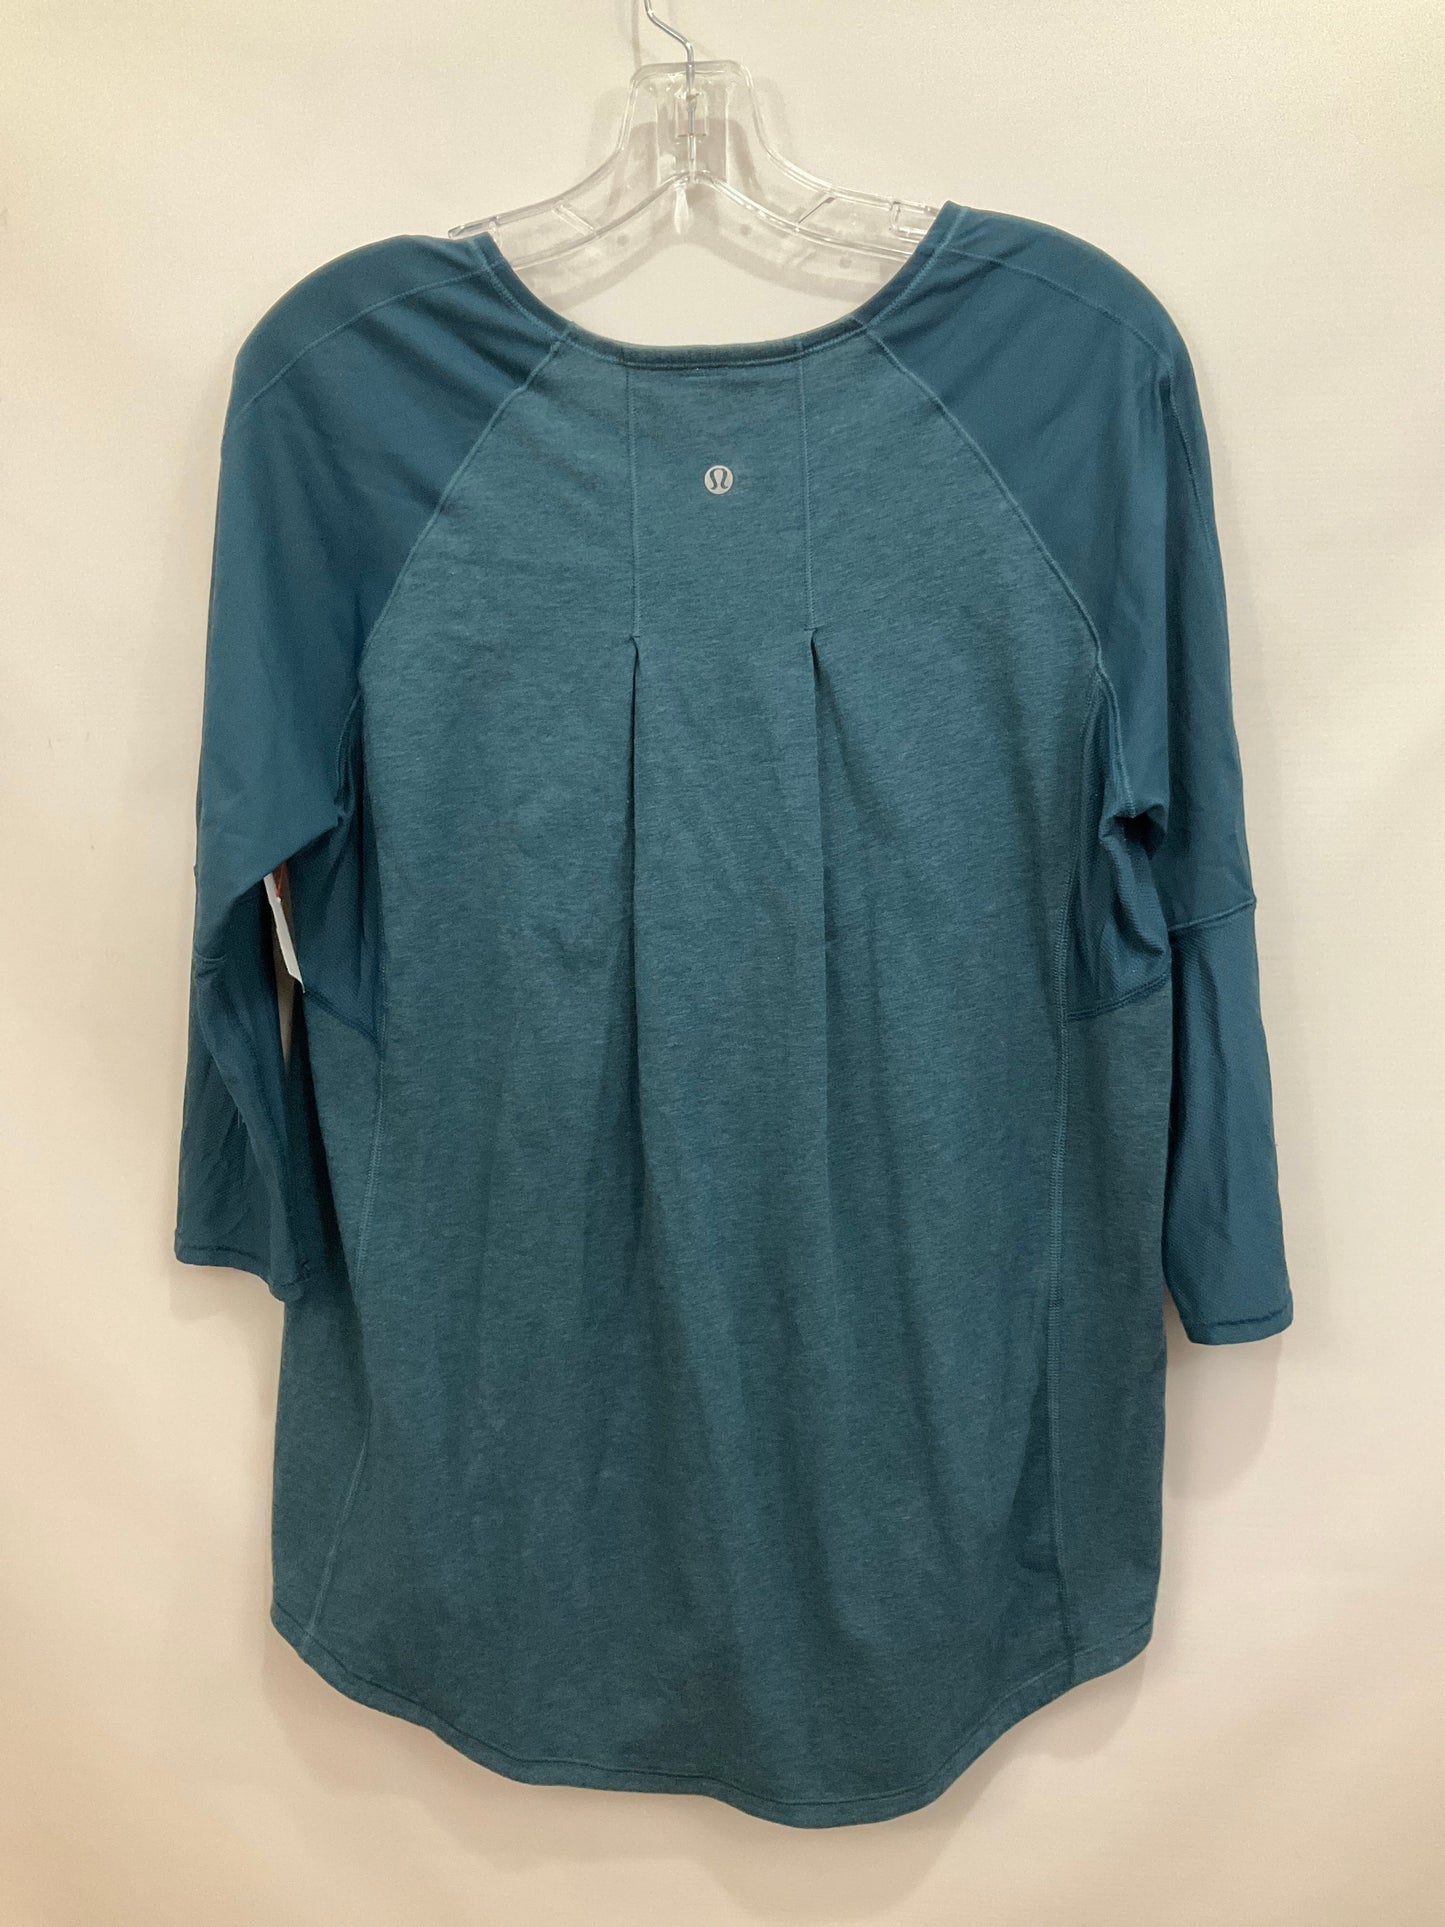 Athletic Top Long Sleeve Collar By Lululemon  Size: 12